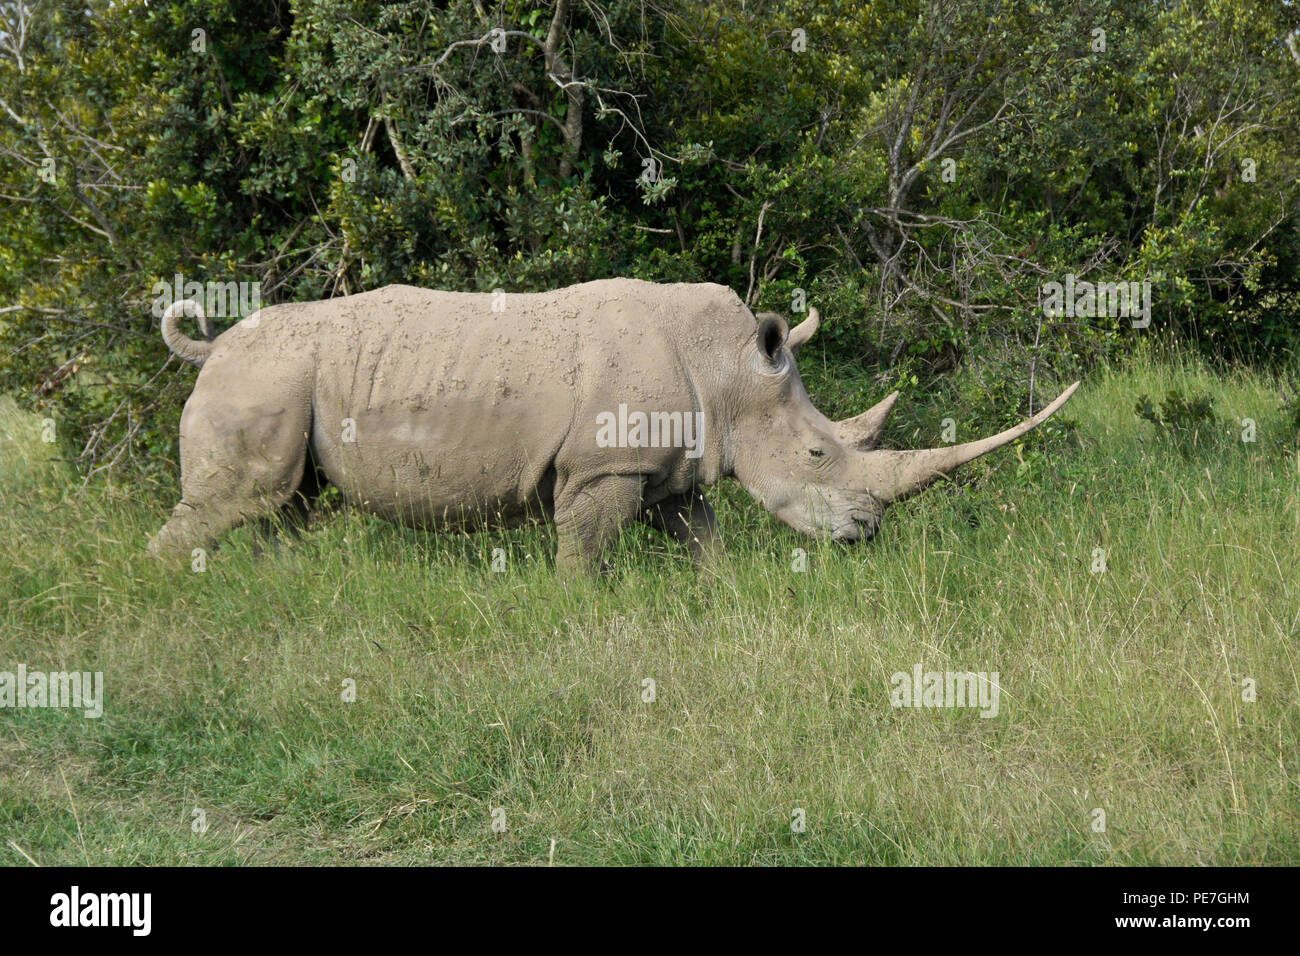 White rhino with curled tail and very long horn walking in the bush, Ol Pejeta Conservancy, Kenya Stock Photo